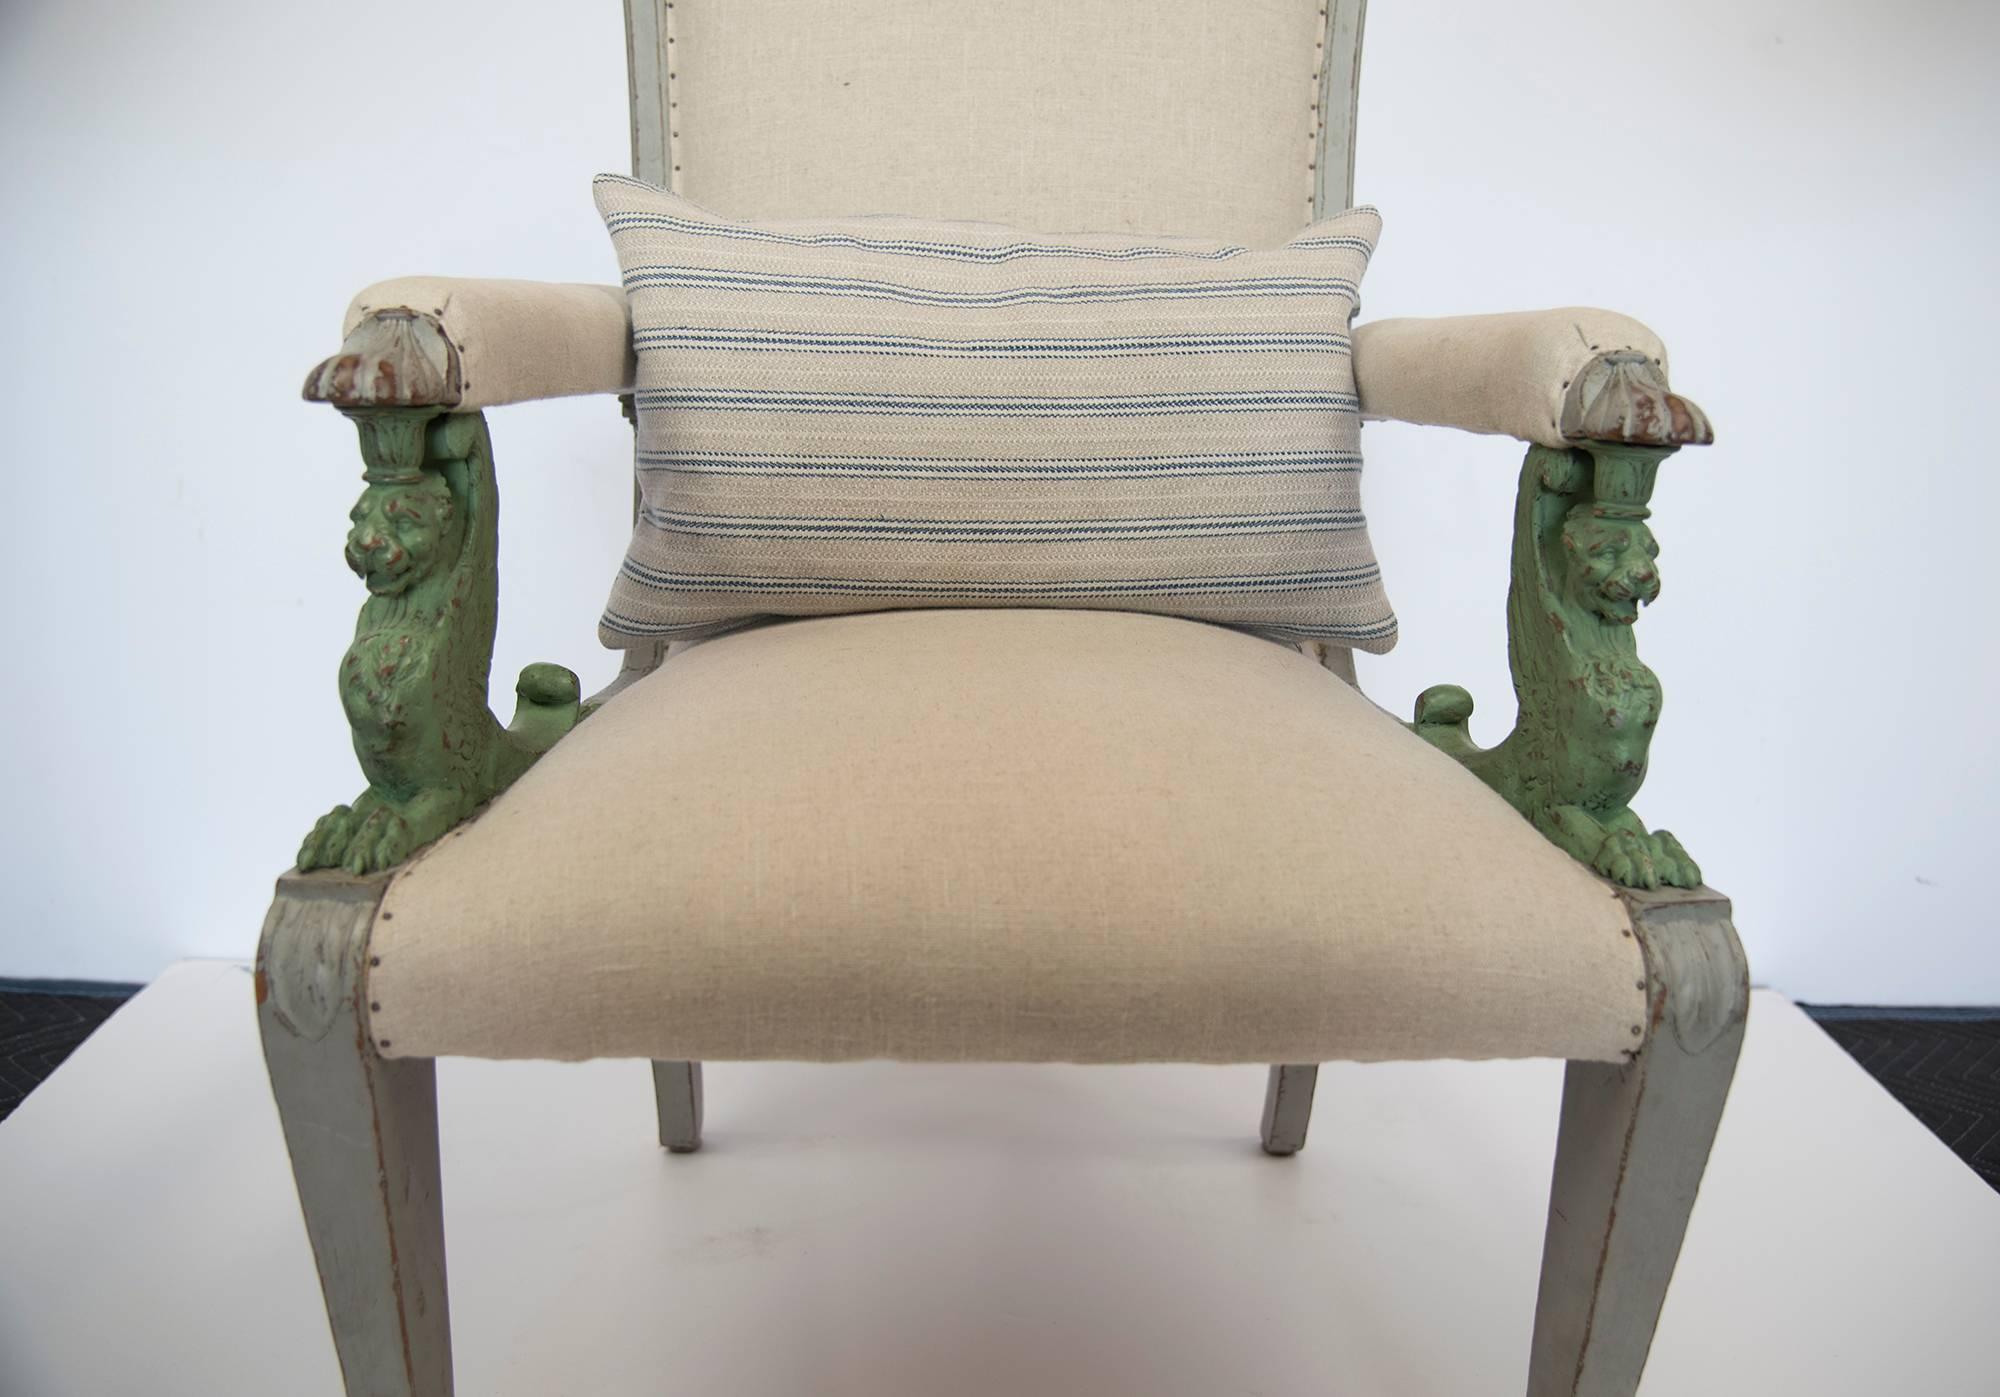 A very unique and perfect condition Swedish armchair with green trim and gargoyle carving on the arms pillow in striped cotton or linen fabric is included. A very comfortable and extraordinary conversational piece to add to your inventory.